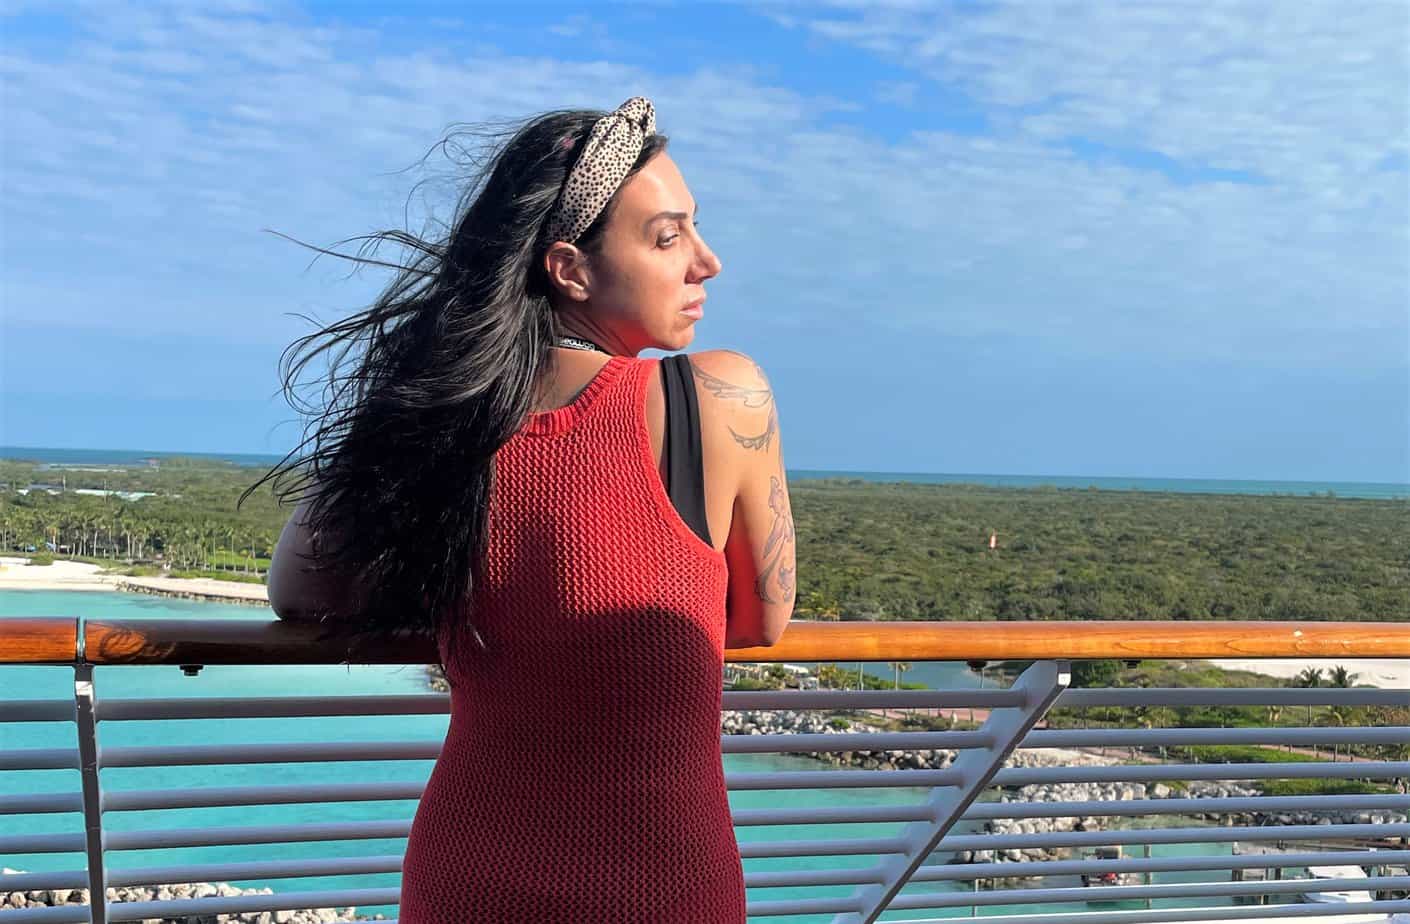 middle aged woman overlooking water on cruise ship